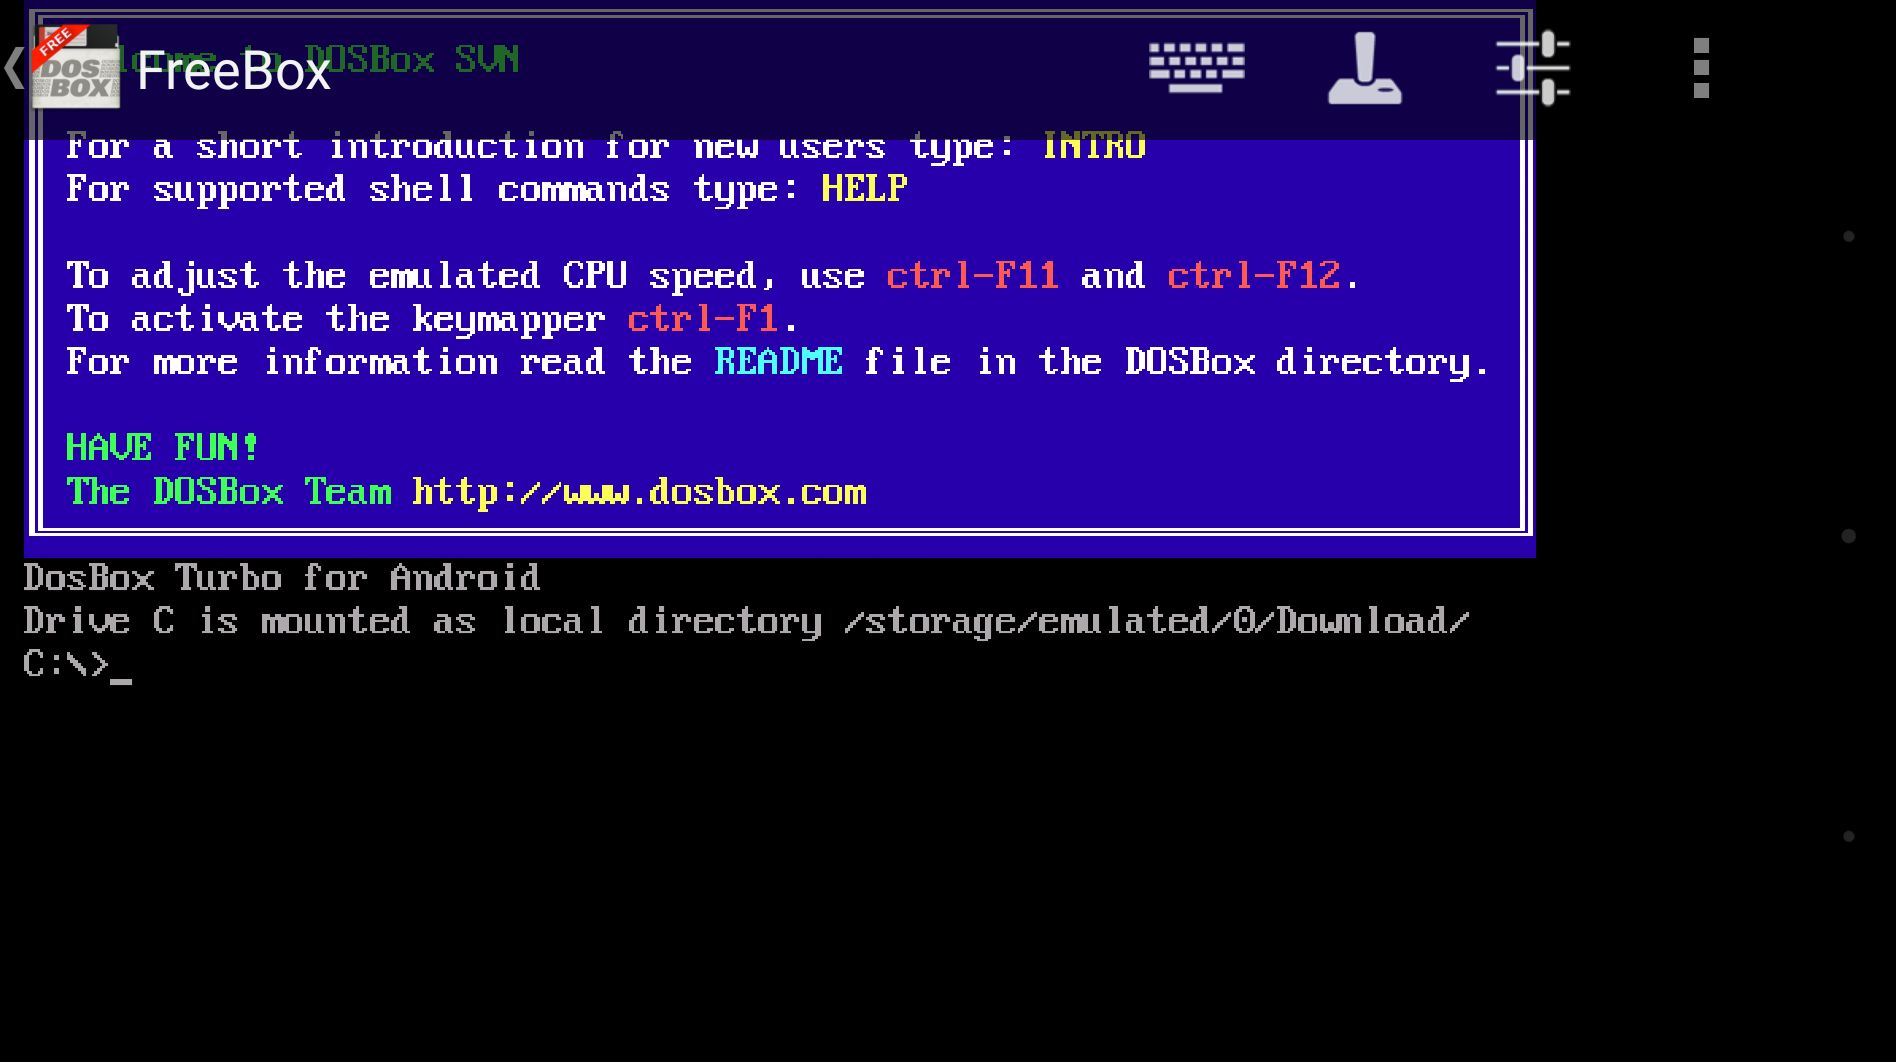 AFreeBox - exe file opener on Android